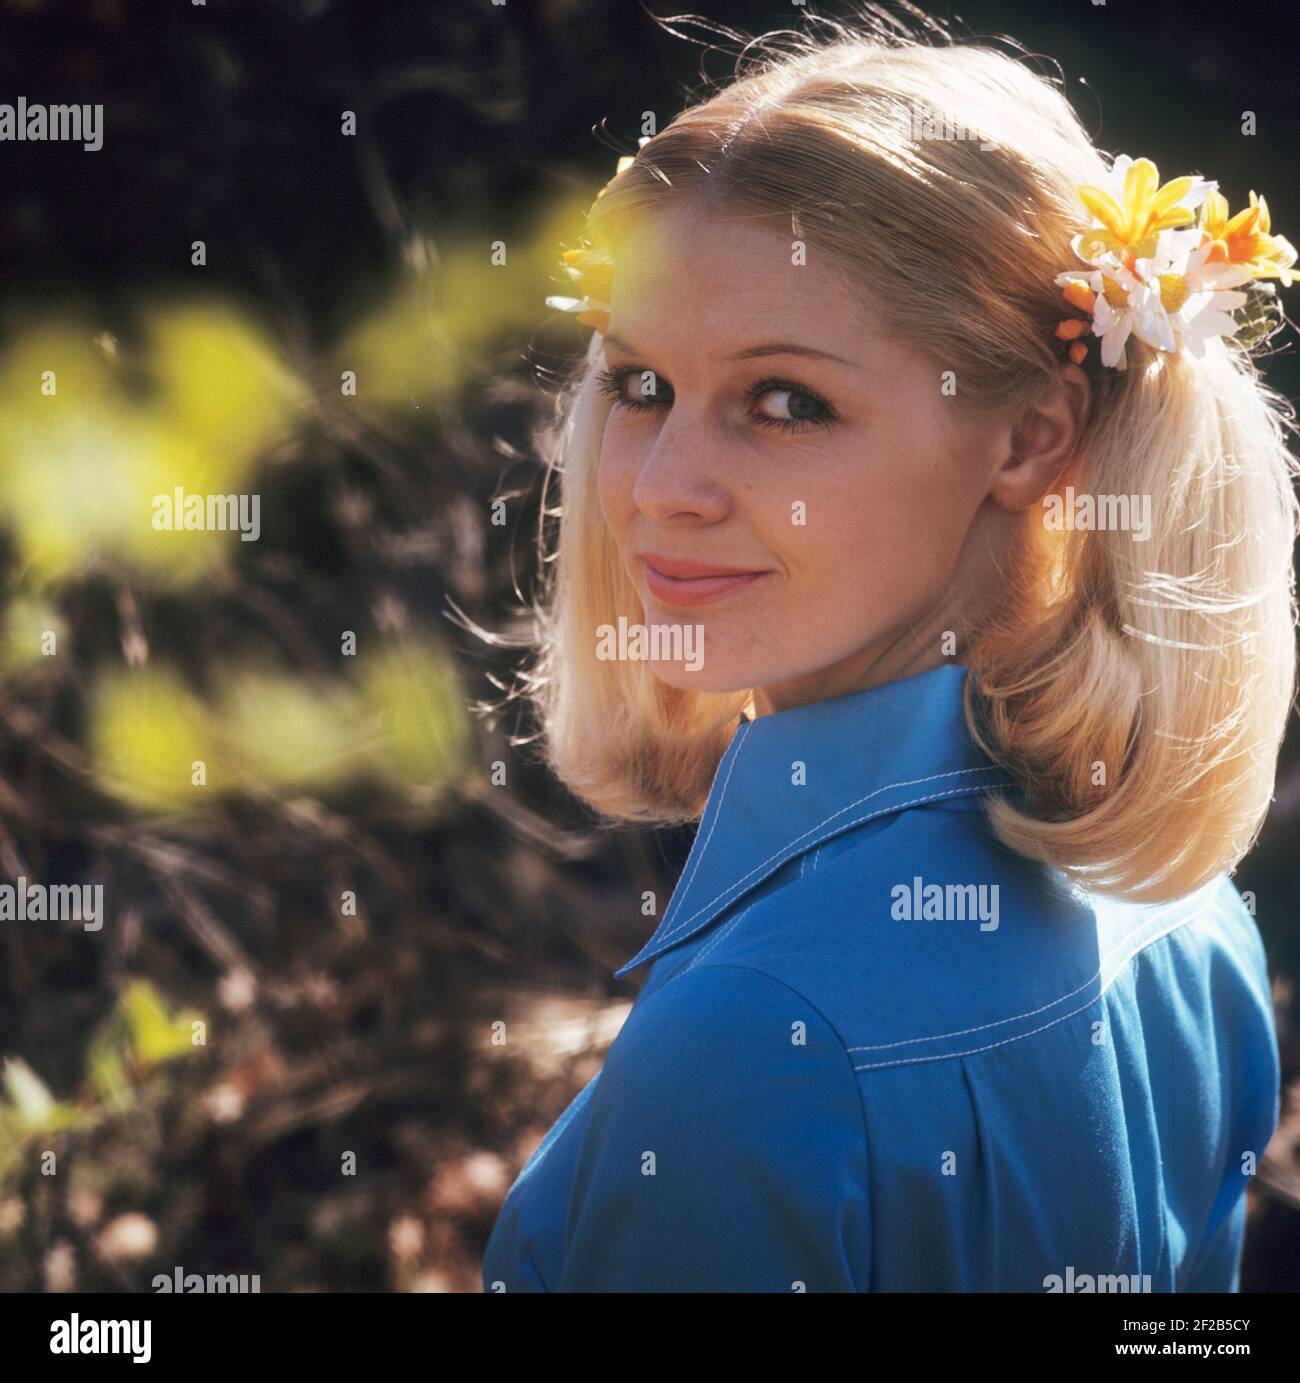 In the 1960s. A young woman with long blonde hair. Sweden 1968 Stock Photo